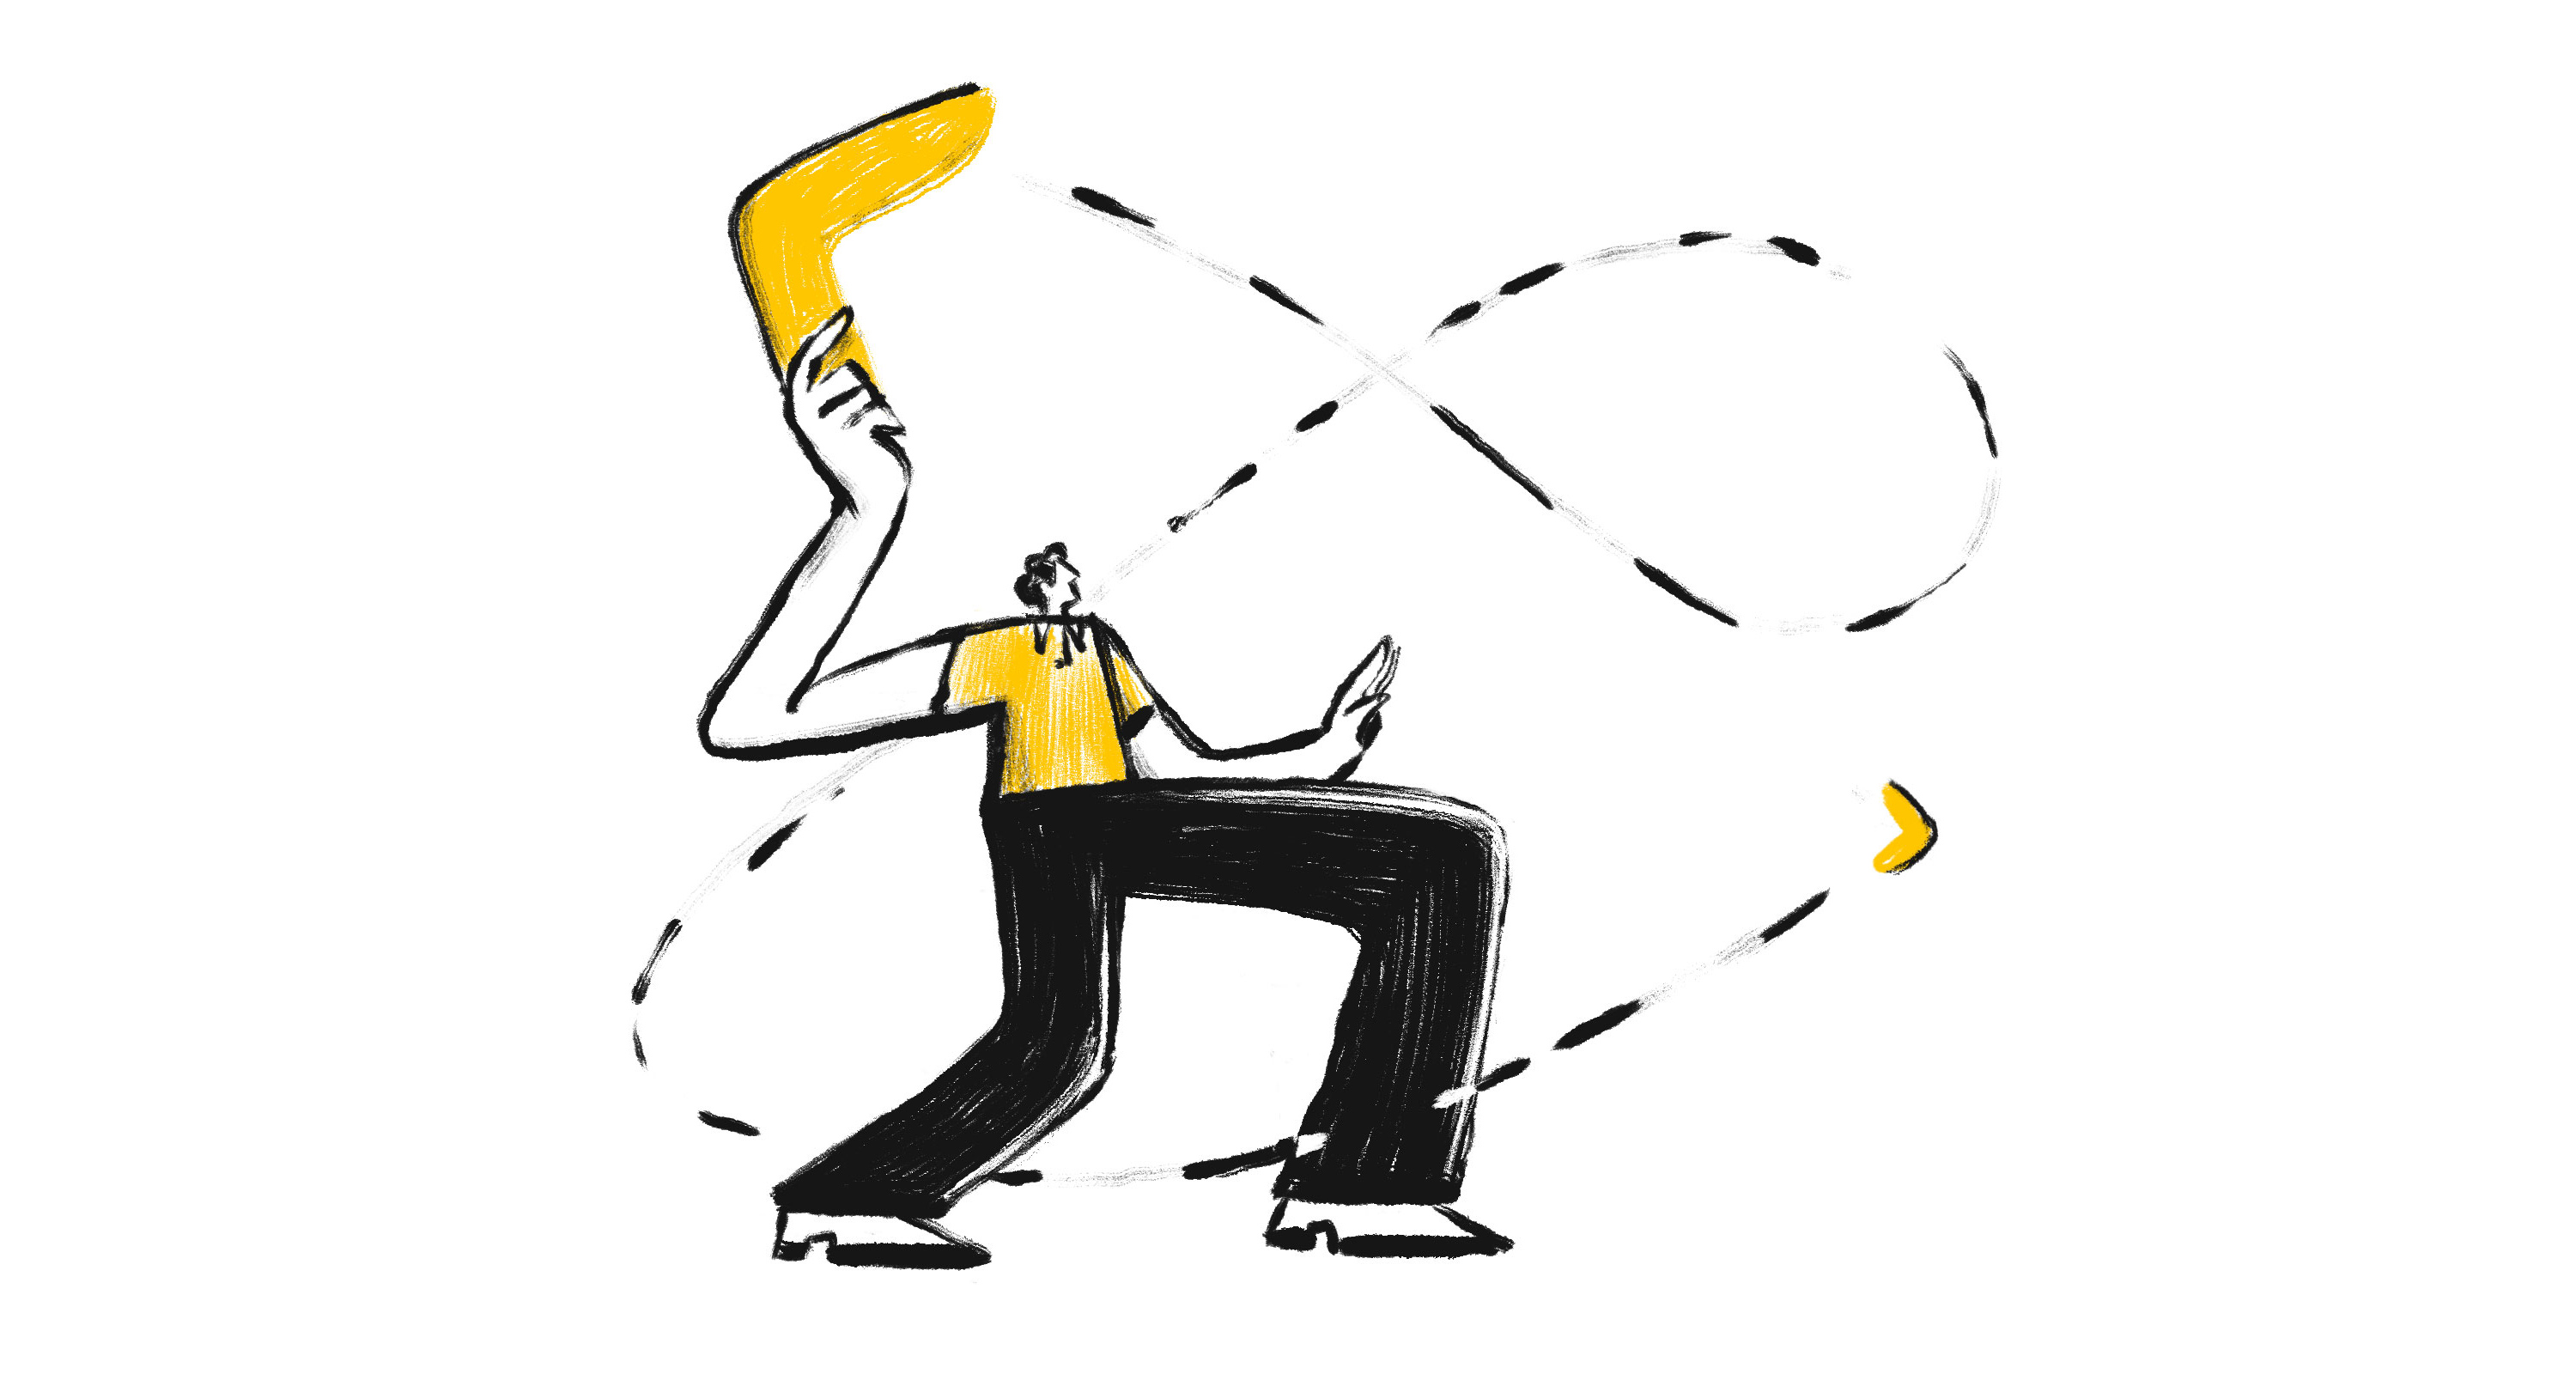 conceptual illustration of a man trowing a boomerang. to depict the idea of continuous development